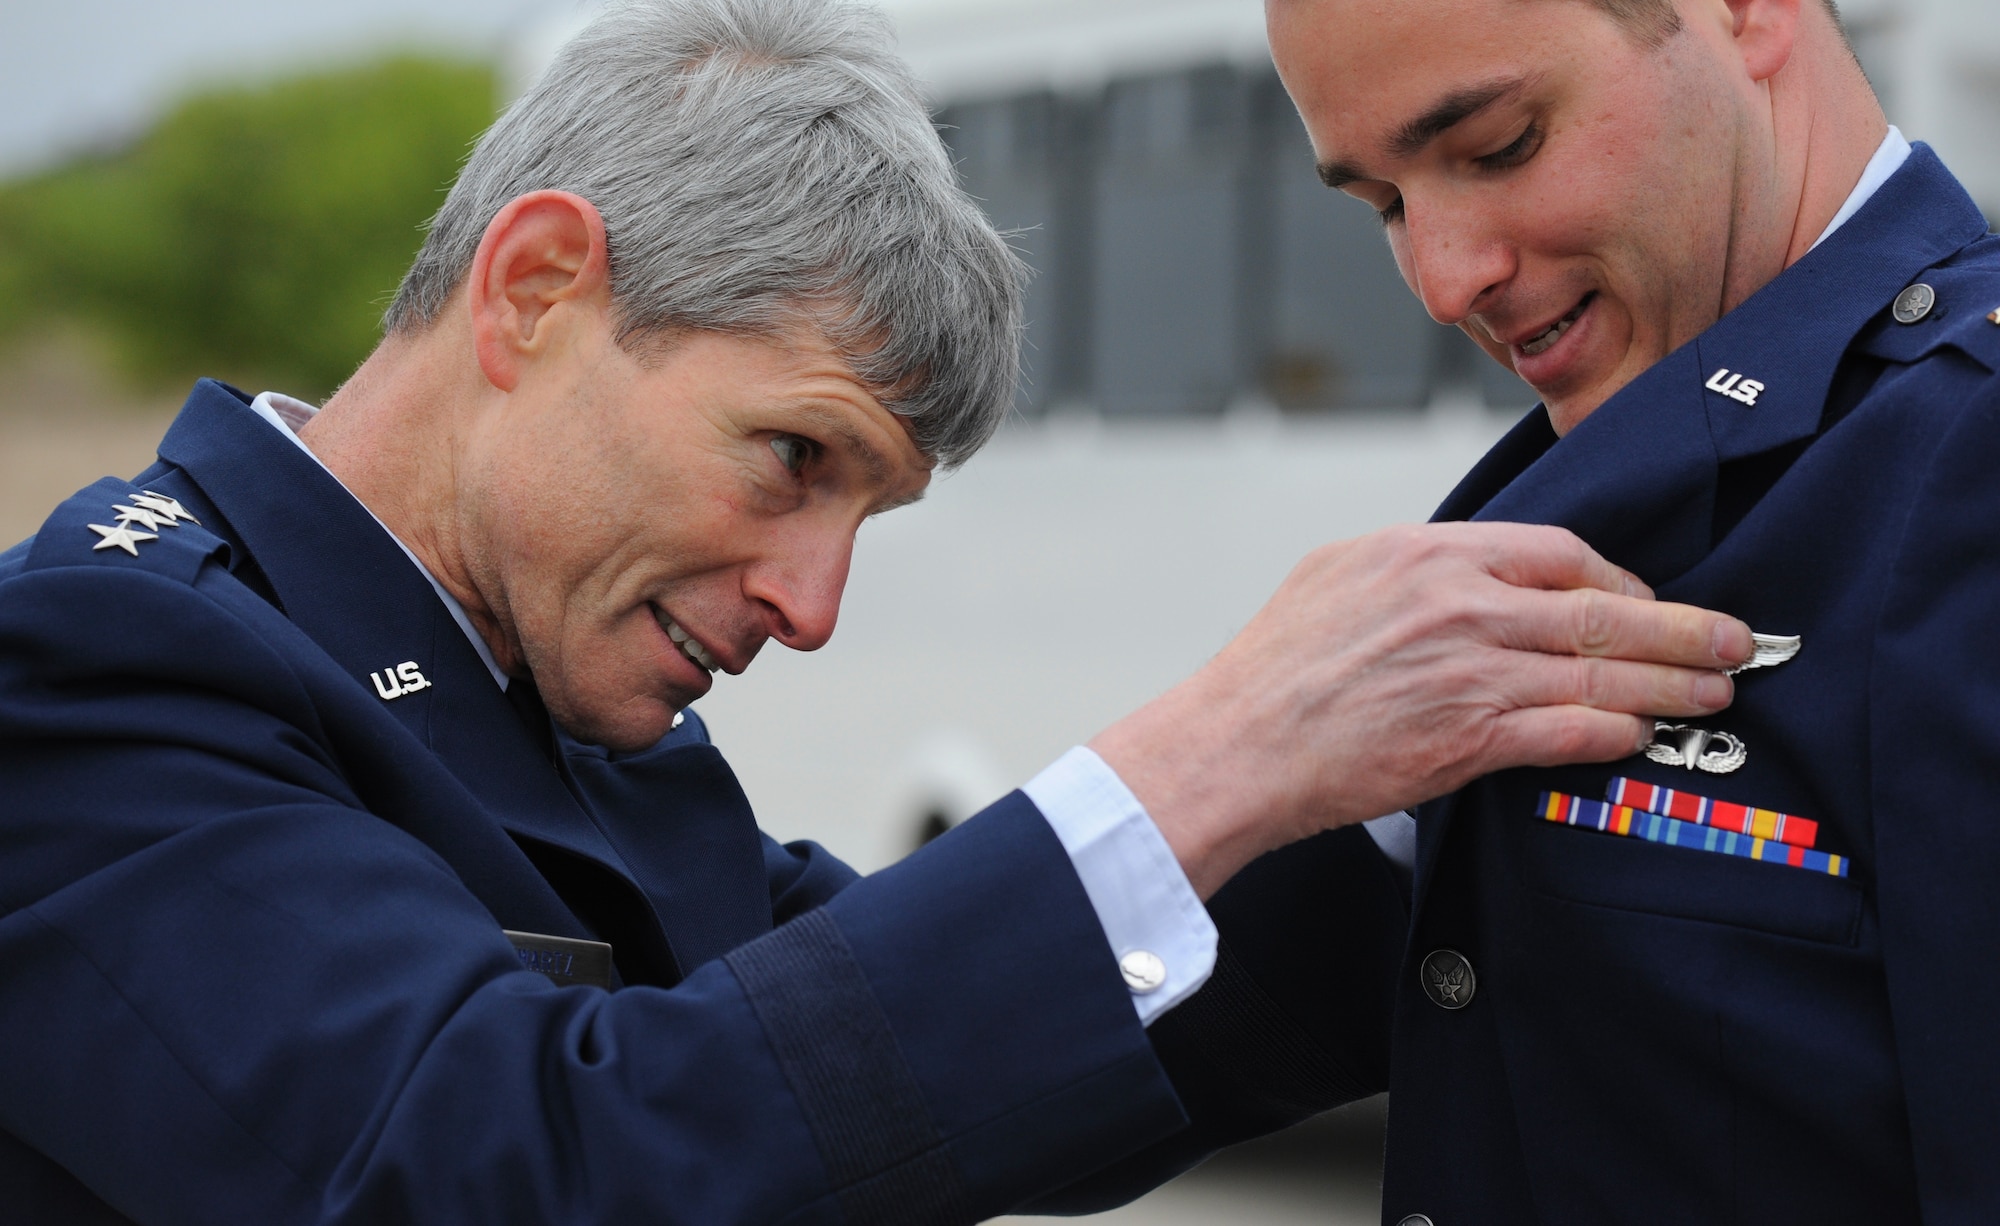 LAUGHLIN AIR FORCE BASE, Texas— Air Force Chief of Staff Gen. Norton Schwartz pins wings on one of the Air Force’s newest pilots here March 9 after the graduation of Specialized Undergraduate Pilot Training Class 12-06. Twenty three of the newest professional aviators were awarded silver wings during the ceremony. (U.S. Air Force photo/Airman 1st Class Nathan L. Maysonet)